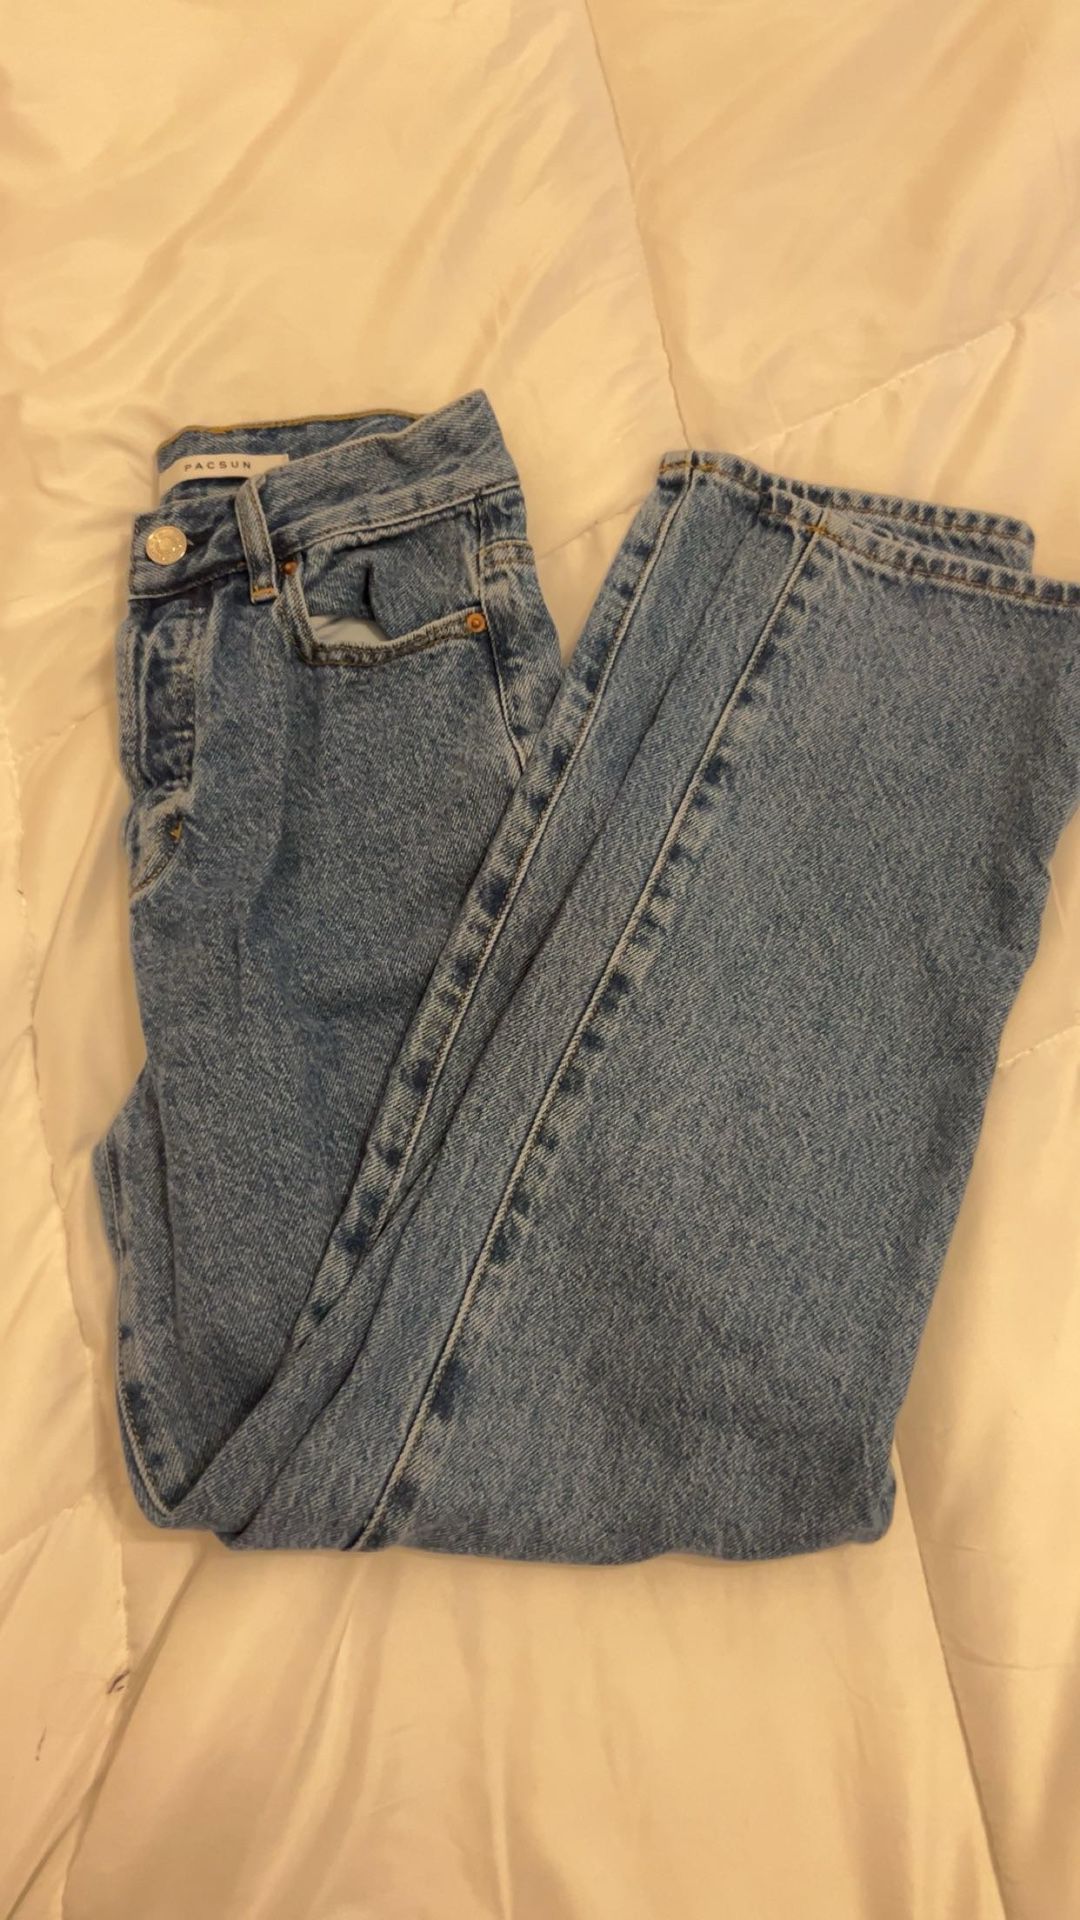 PacSun Slim Jeans (no Rips)